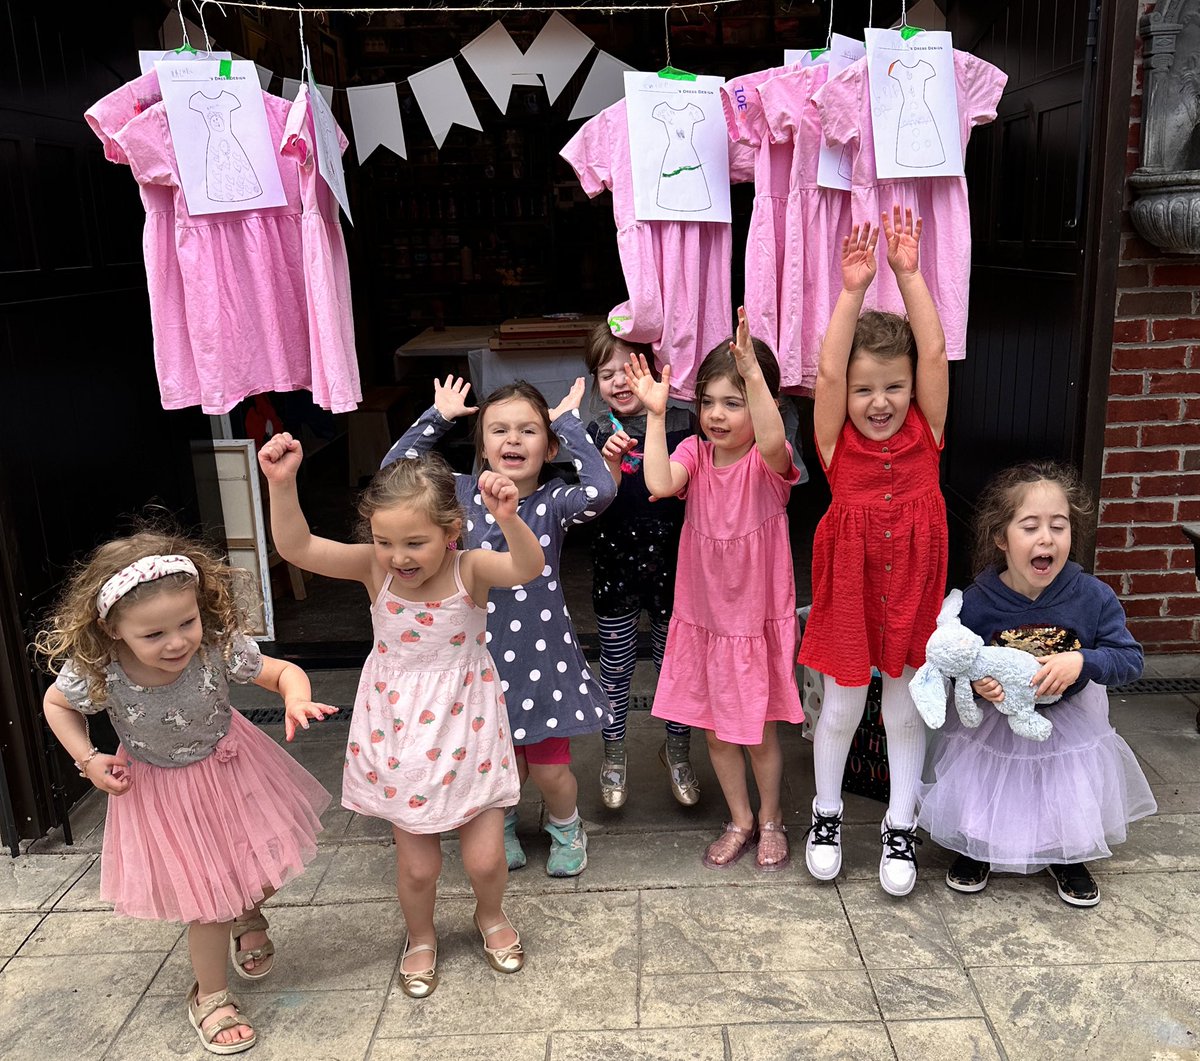 This weekend we had a great time helping Hazel celebrate her 6th birthday at the studio. We painted our nails, and decorated pink dresses. 💅🏽👗🎨 Can we please take a minute to observe the cuteness and excitement in these photos! 🥳😍 #BirthdayPartyFun #WhoRunTheWorldGIRLS